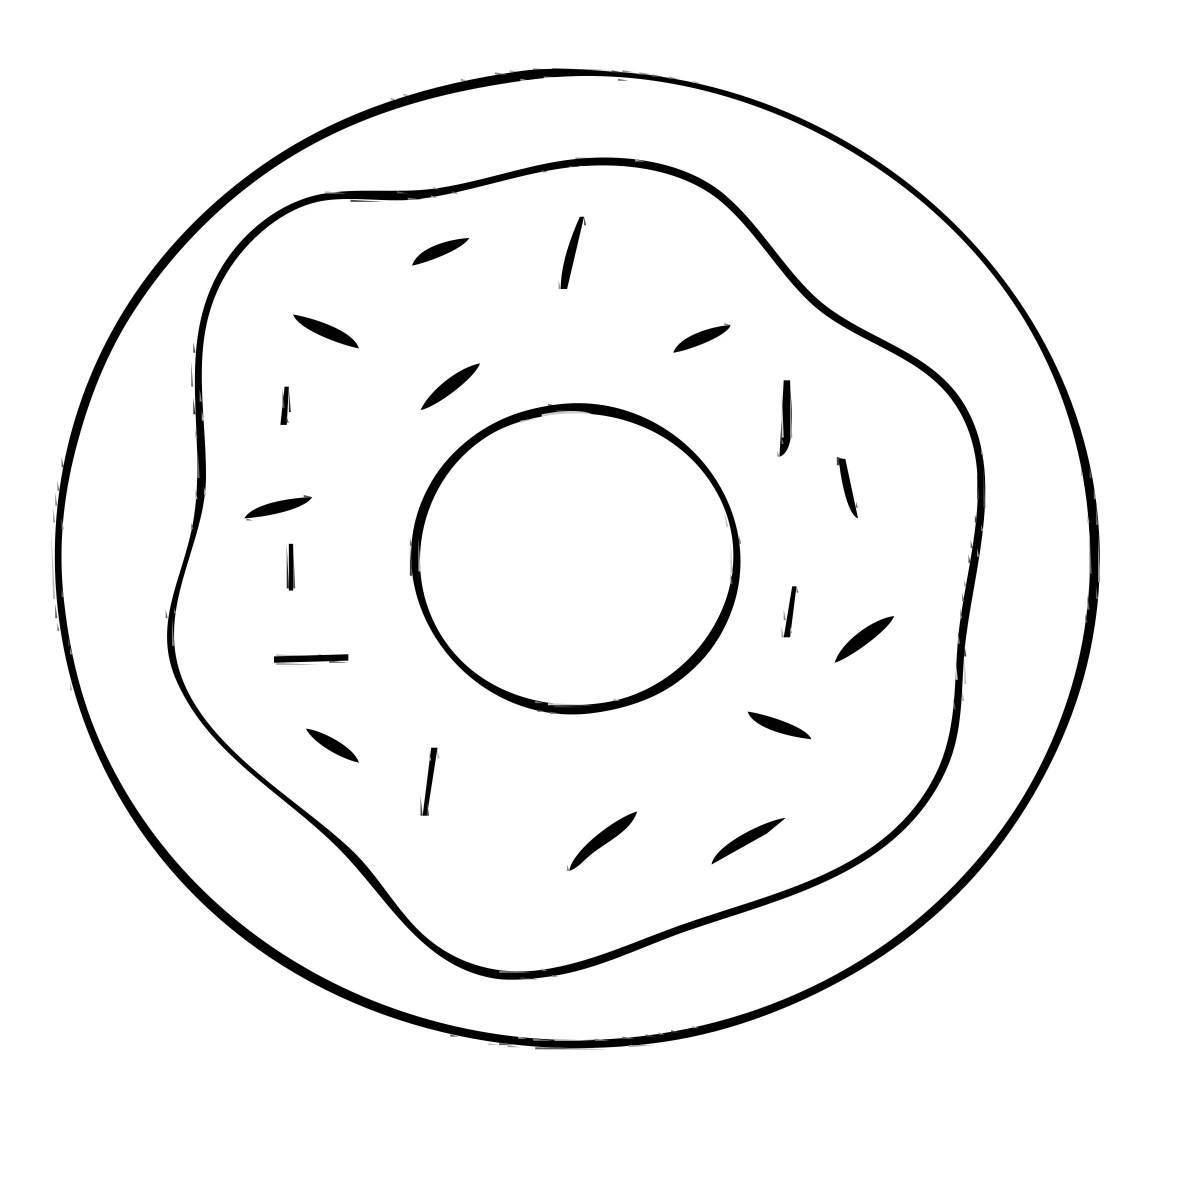 Fancy donuts coloring pages for girls